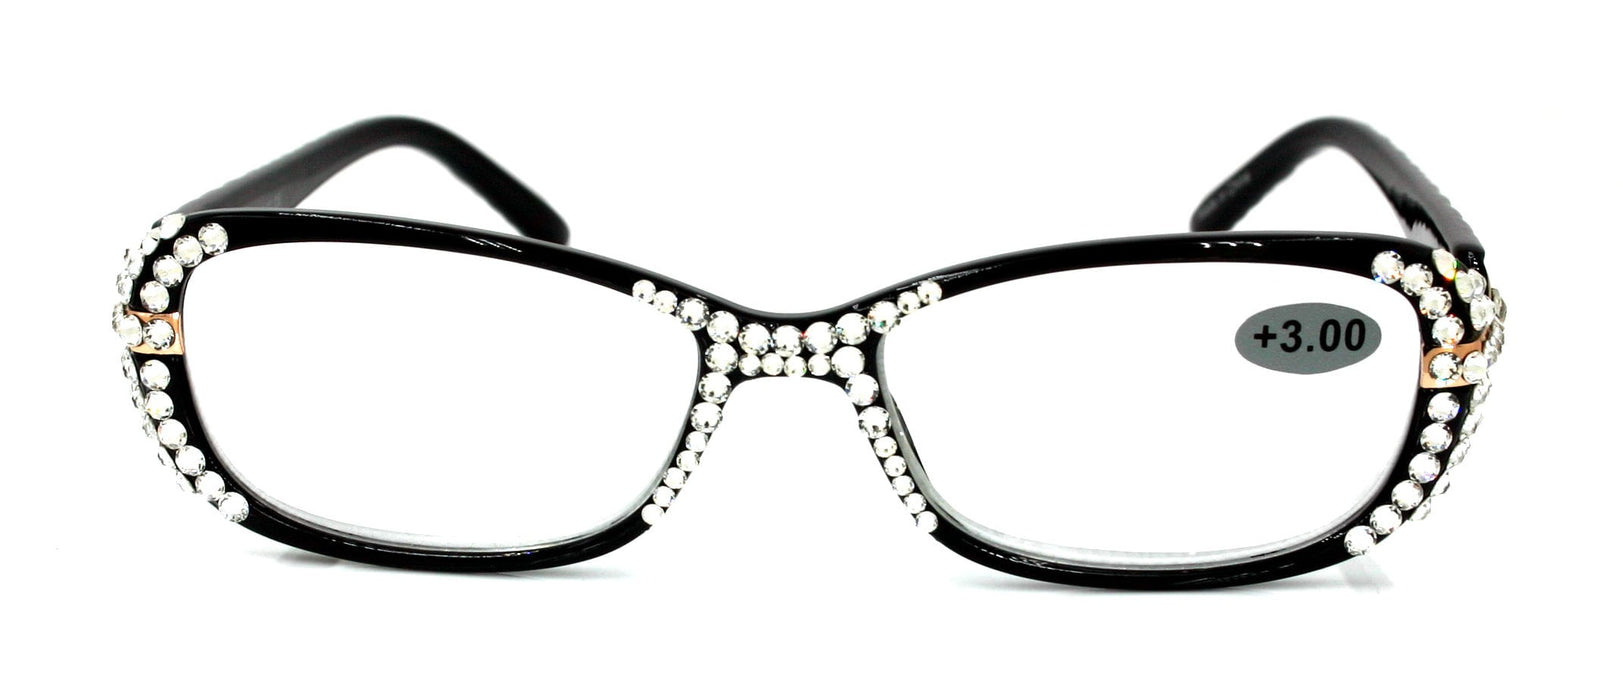 Glamour Quilted, (Bling) Women Reading Glasses W (Sides, Front) (Clear) Genuine European Crystals +1.25..+3.50 Rectangular. NY Fifth Avenue